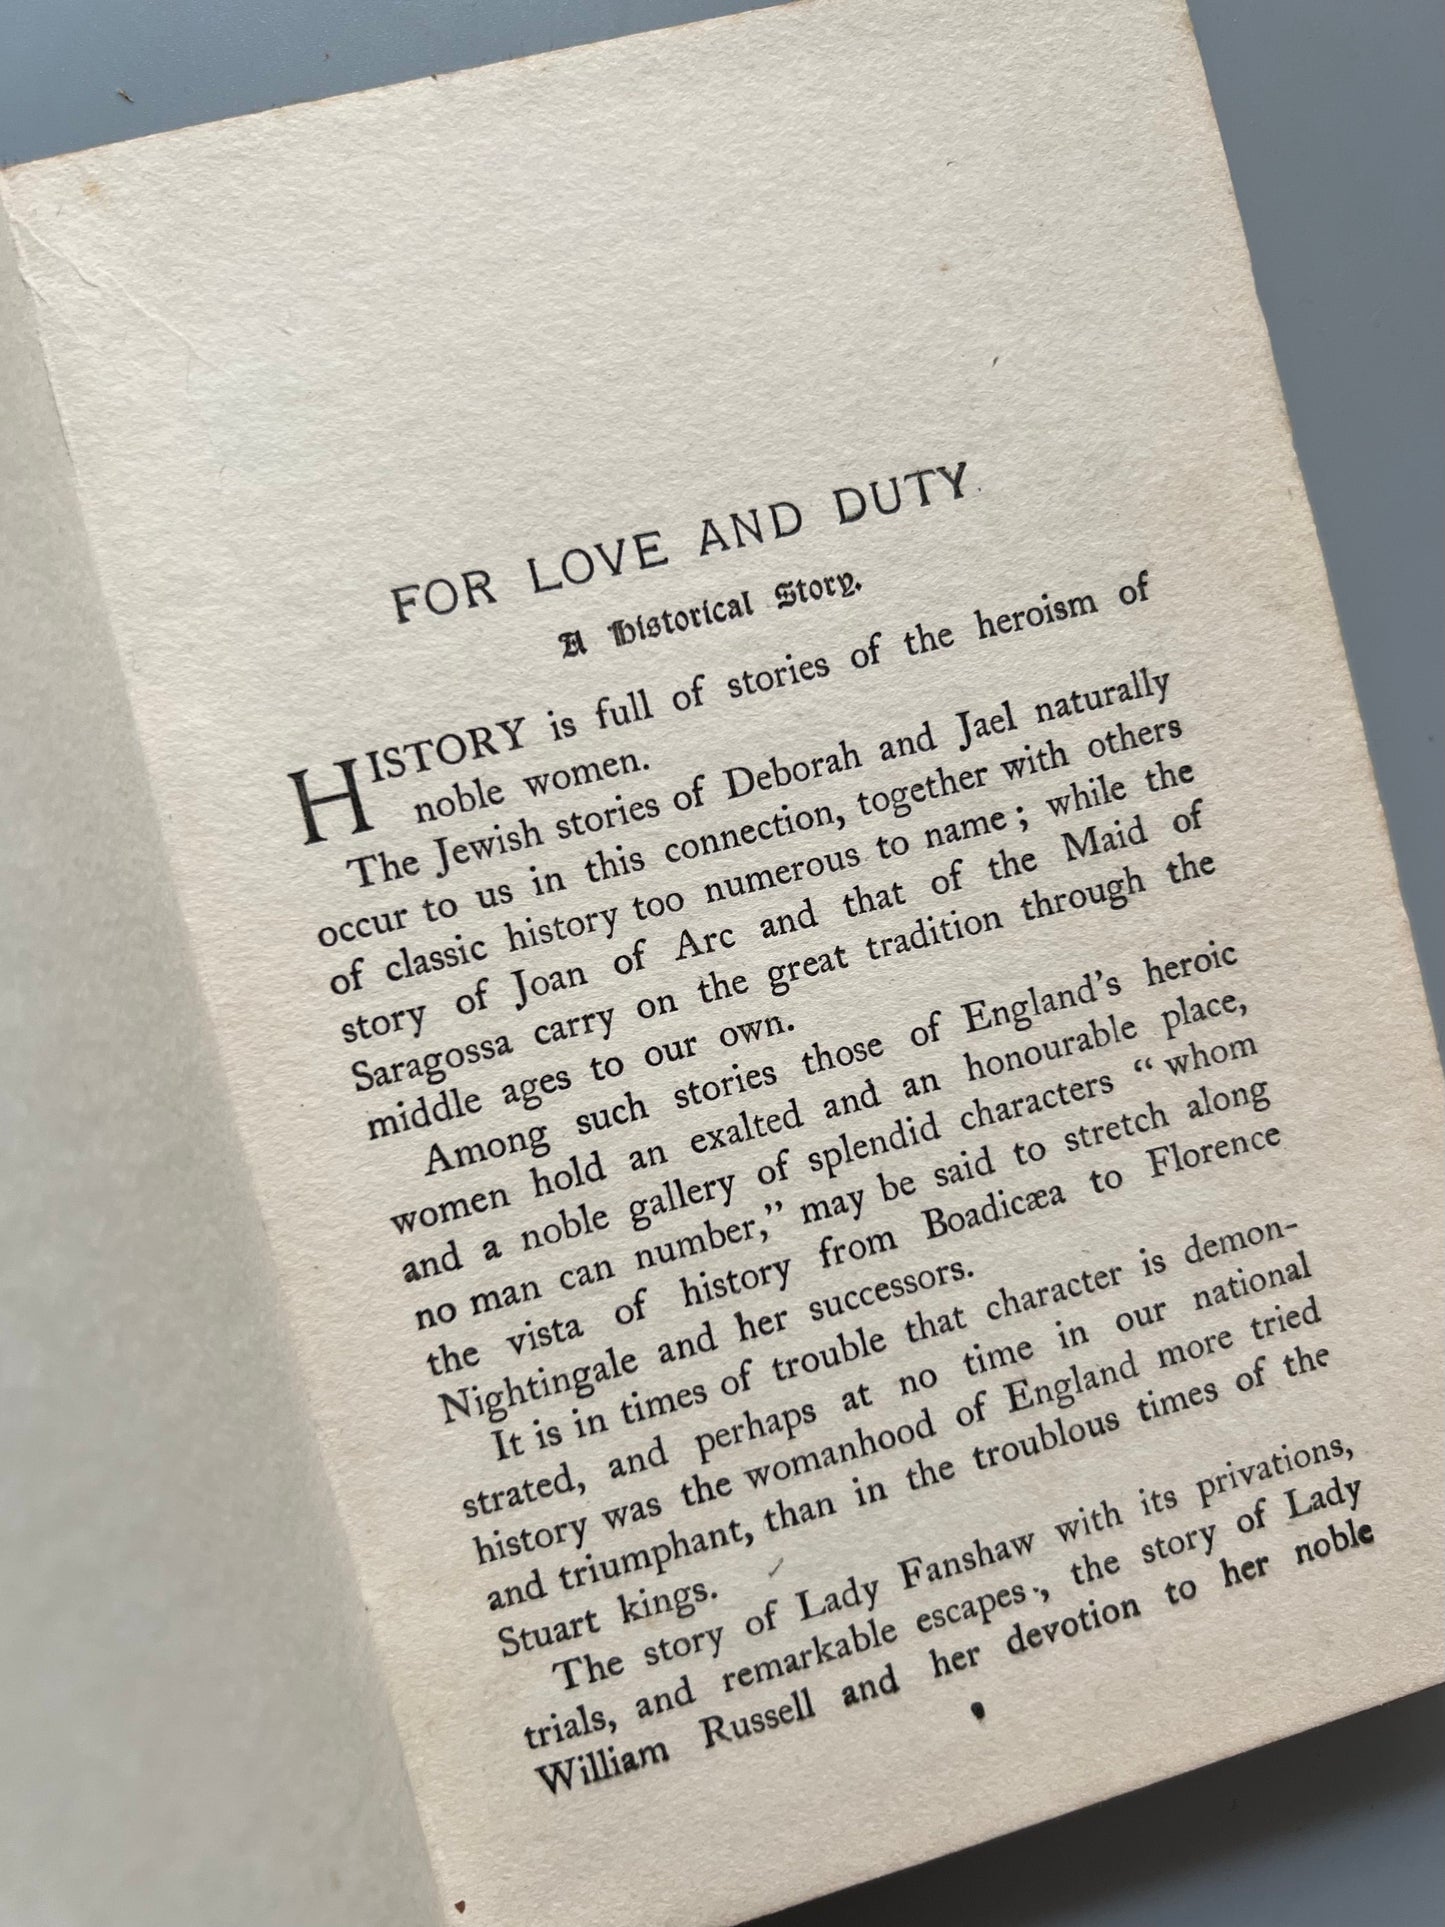 For love and duty and other stories, Alfred H. Miles - John F. Shaw & Co, ca. 1910